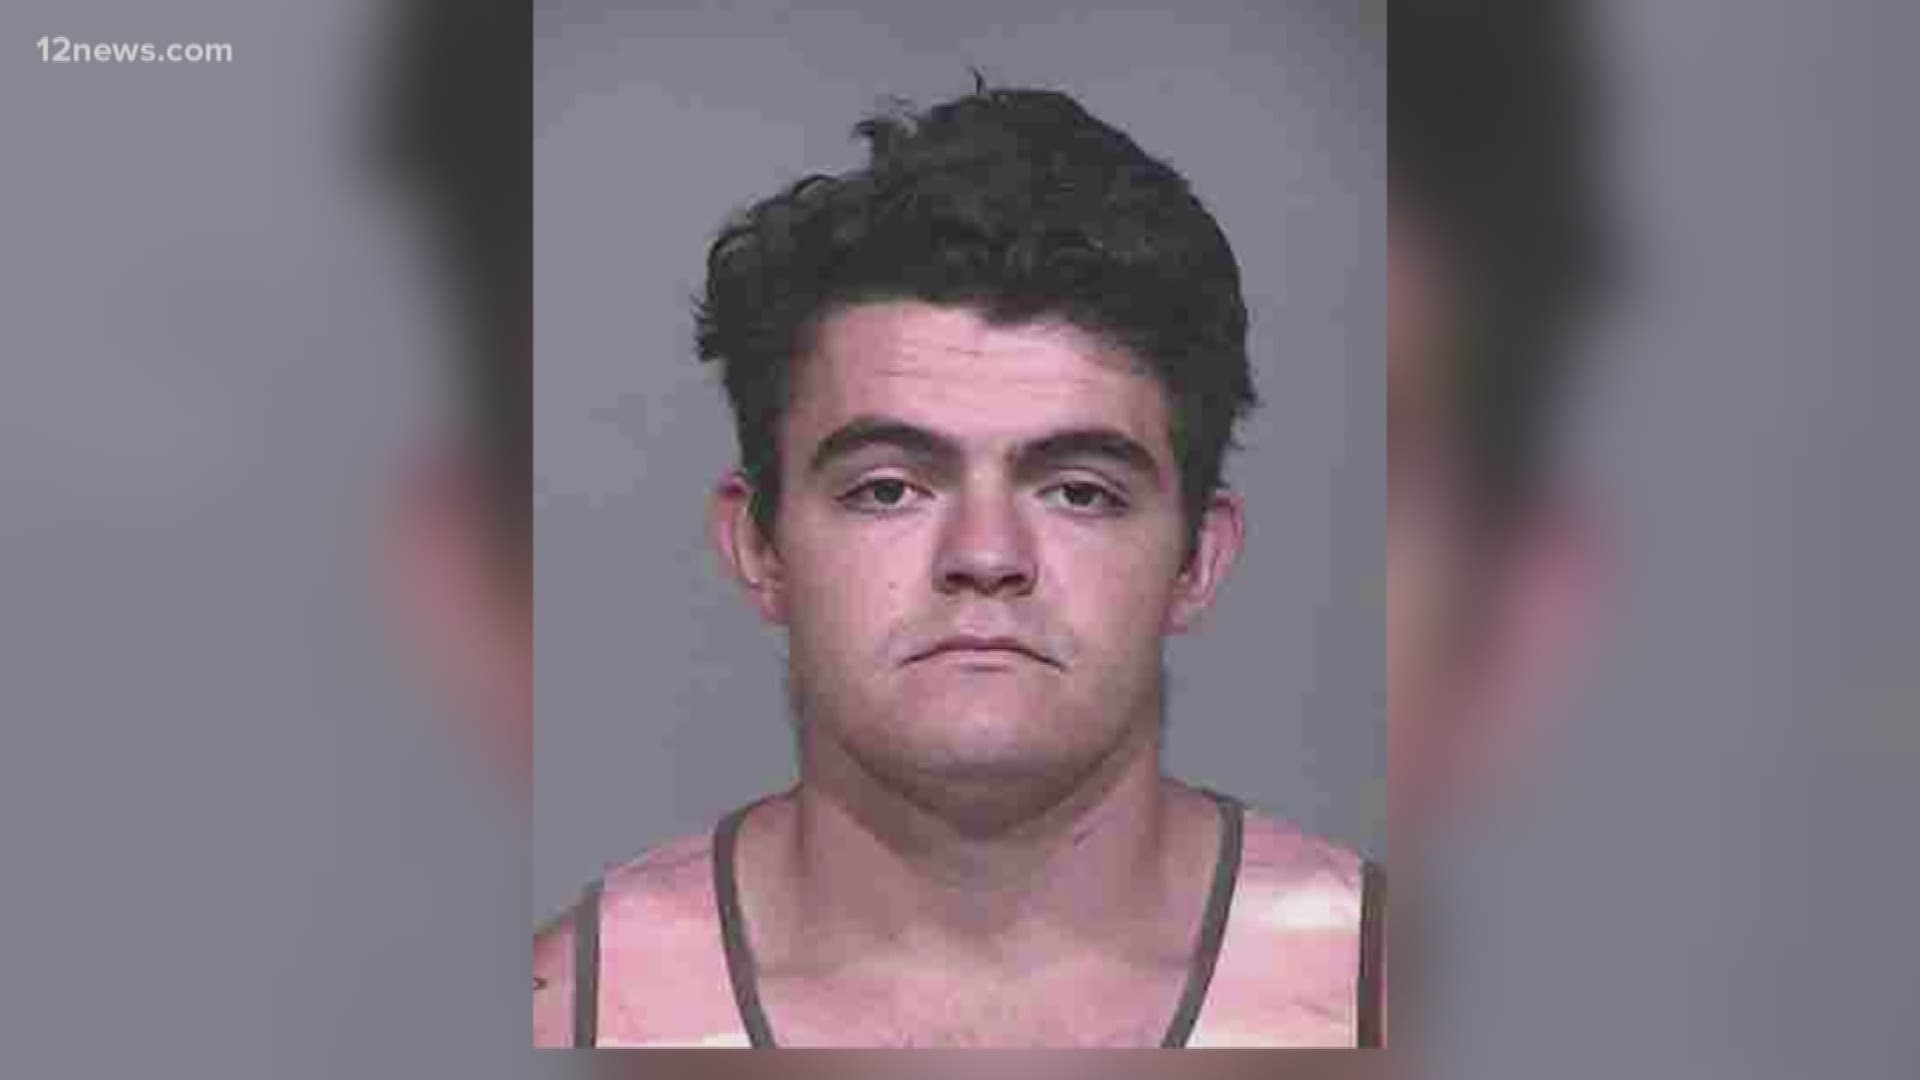 Jayden Curtis has been charged for the murder of a 70-year-old homeless woman.